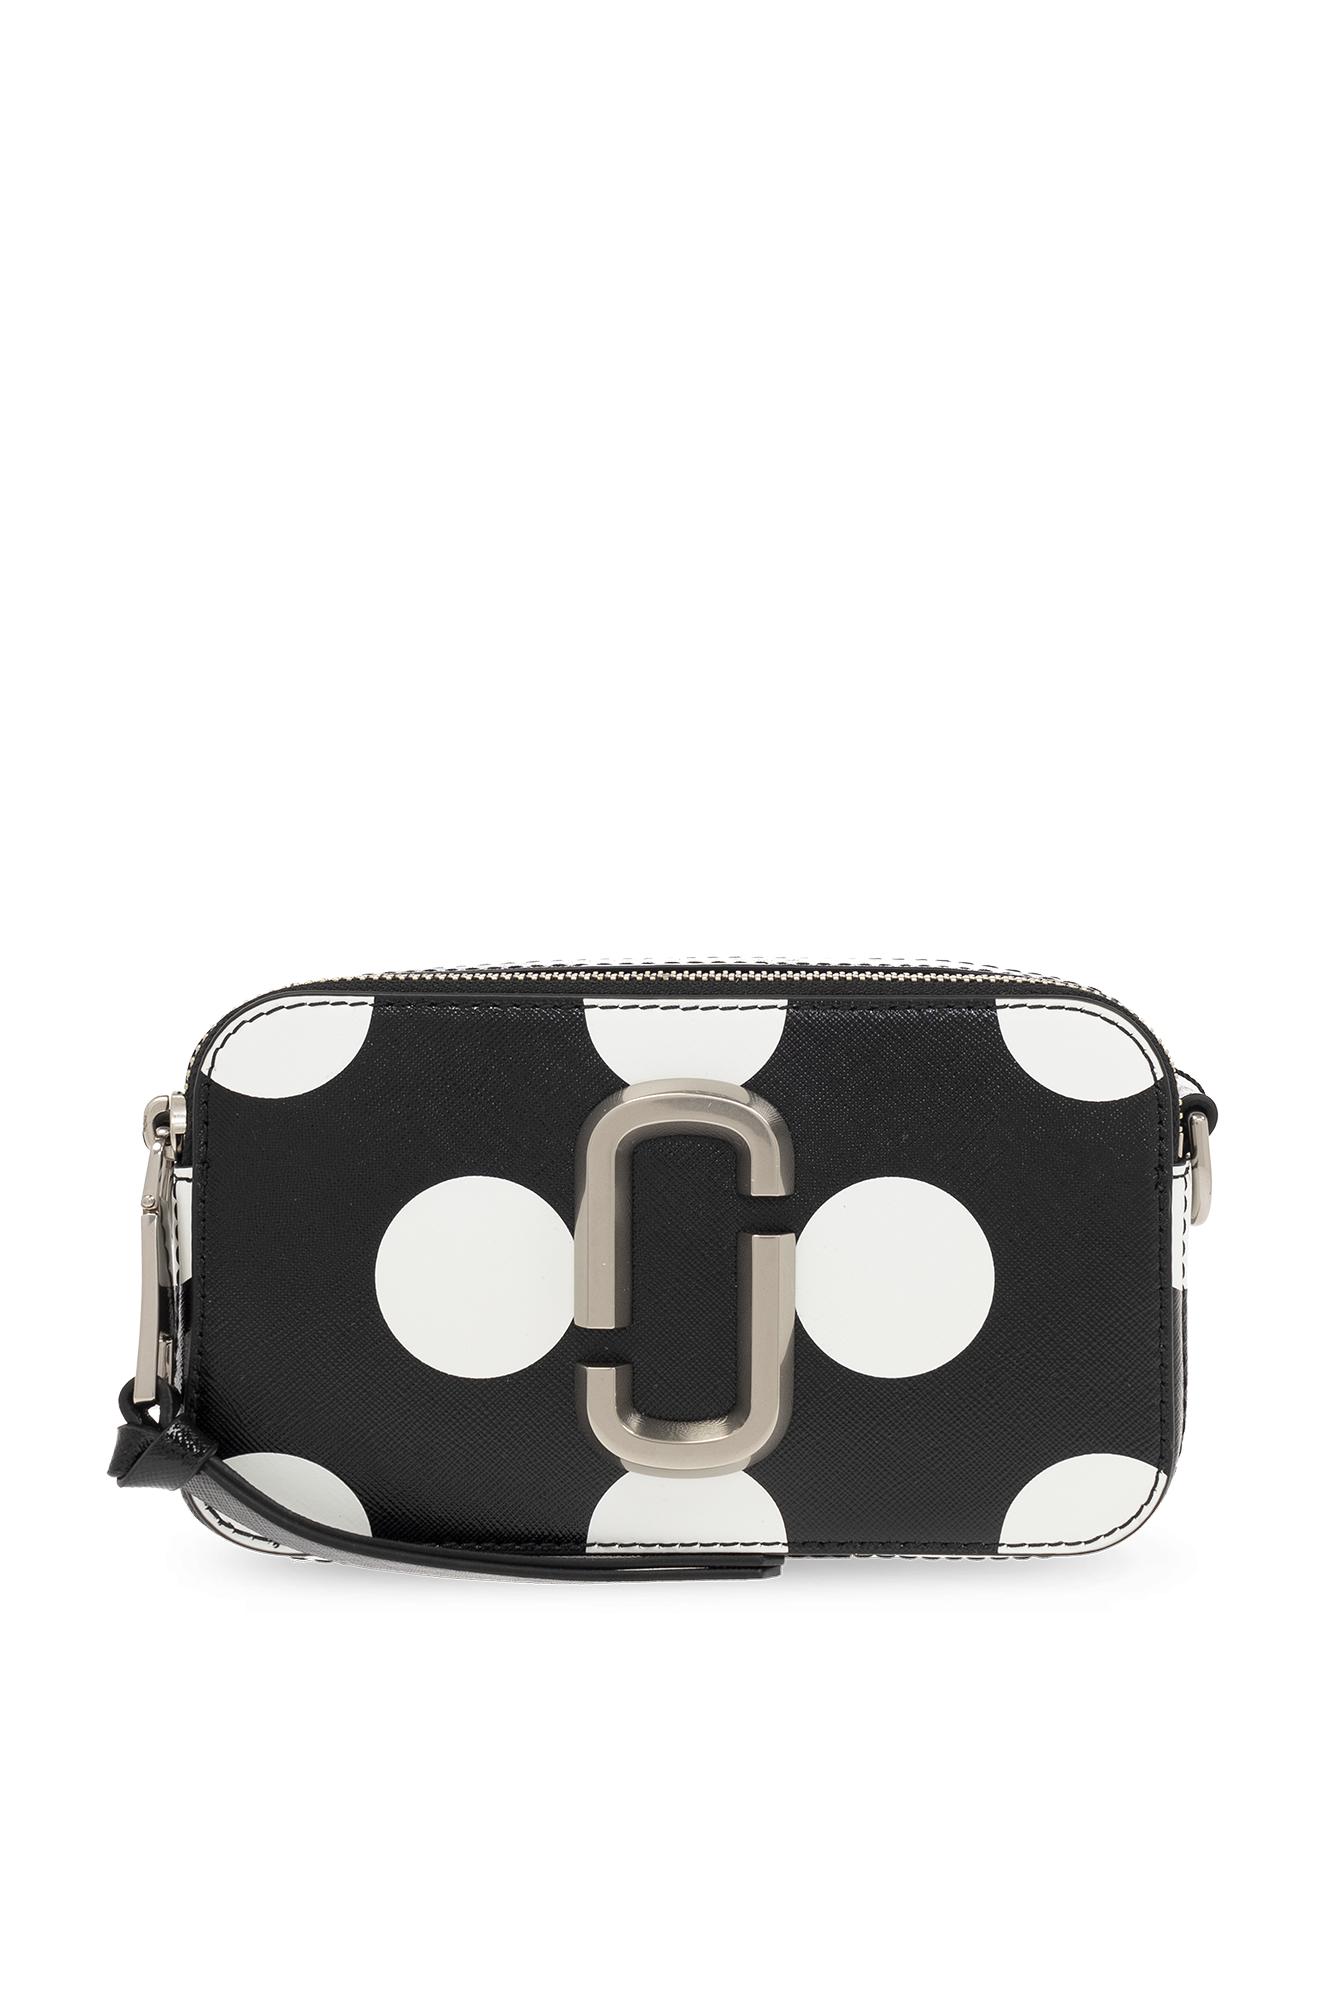 Snapshot of Marc Jacobs - Dark and light taupe colored bag made of